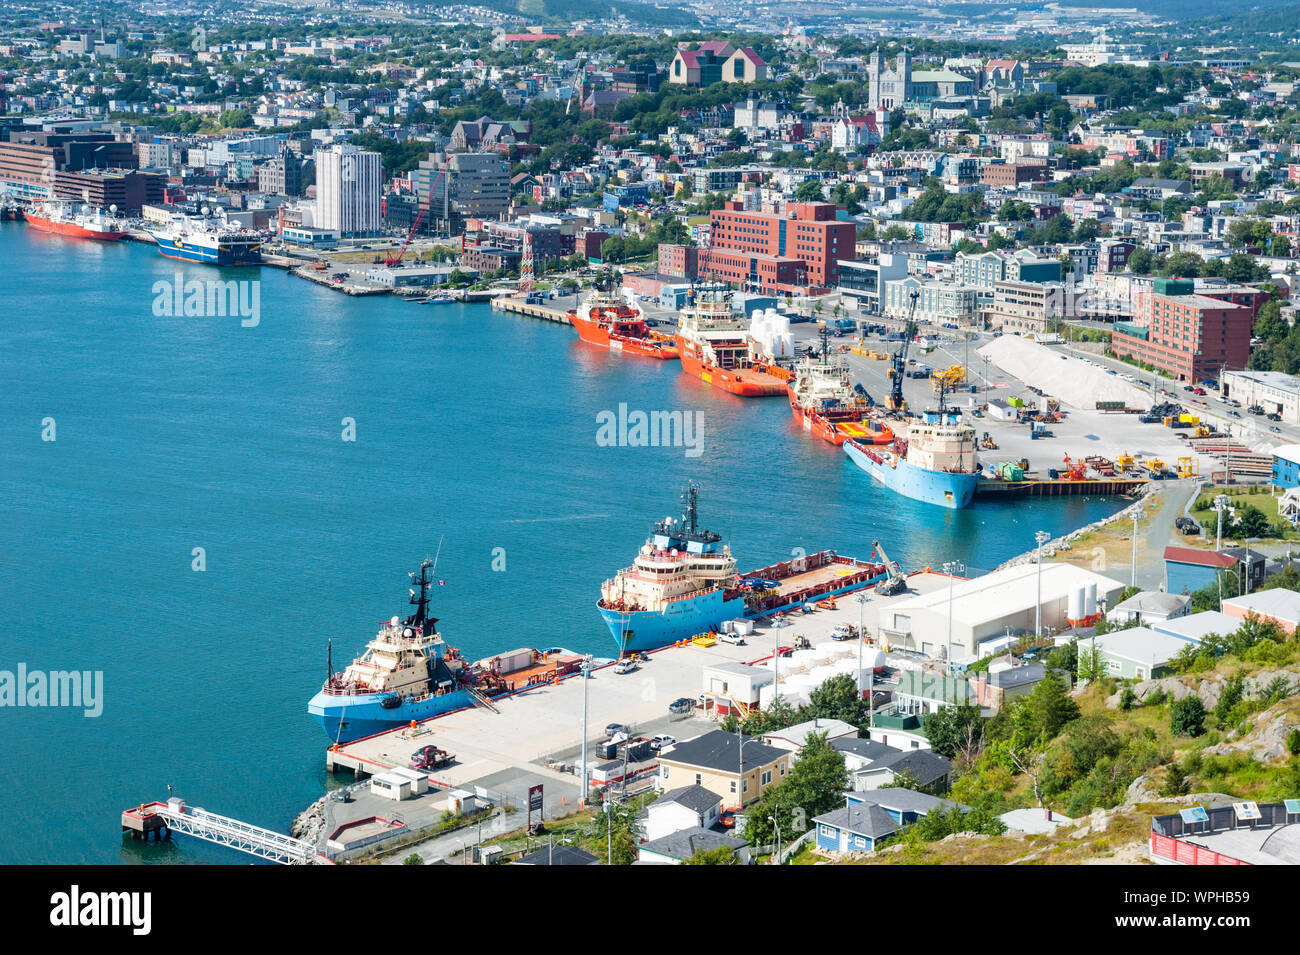 ST. JOHN'S, CANADA - AUGUST 26, 2015: Several offshore supply ships are docked in St. John's Harbour in Newfoundland. Stock Photo